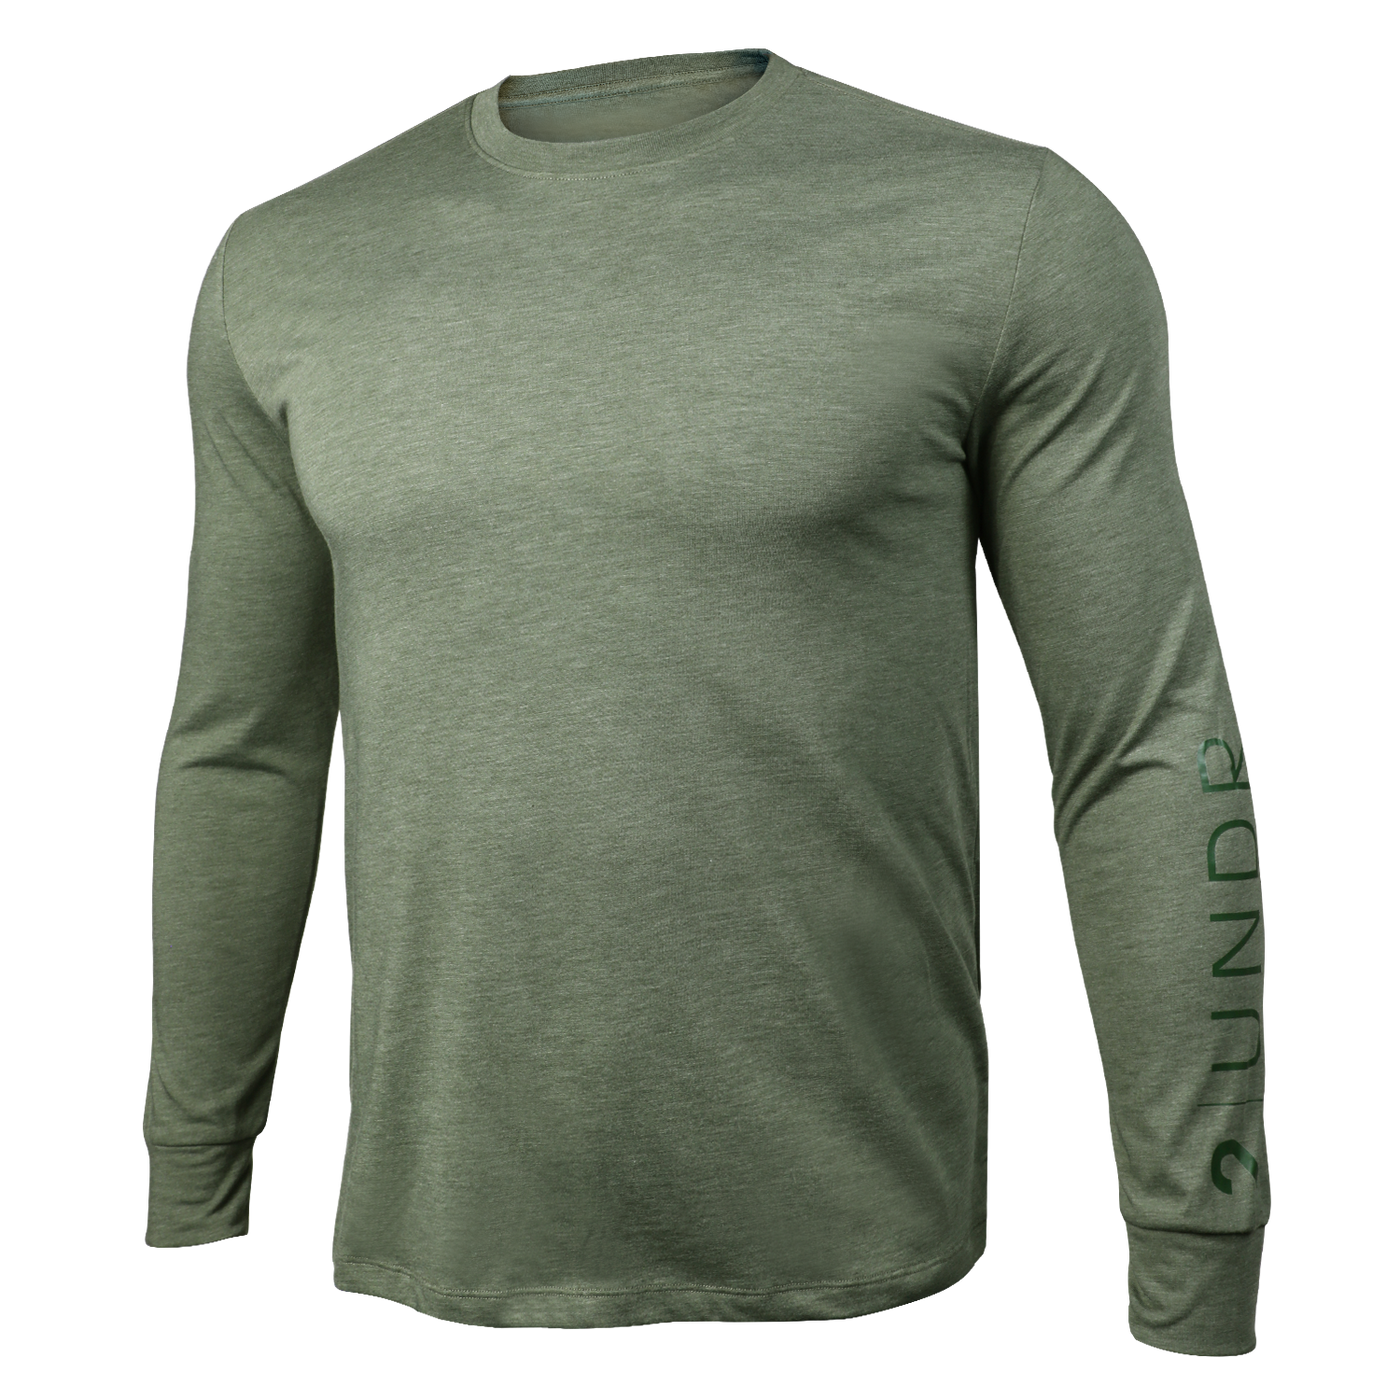 Branded All Day Long Sleeve Crew Tee - Heathered Green